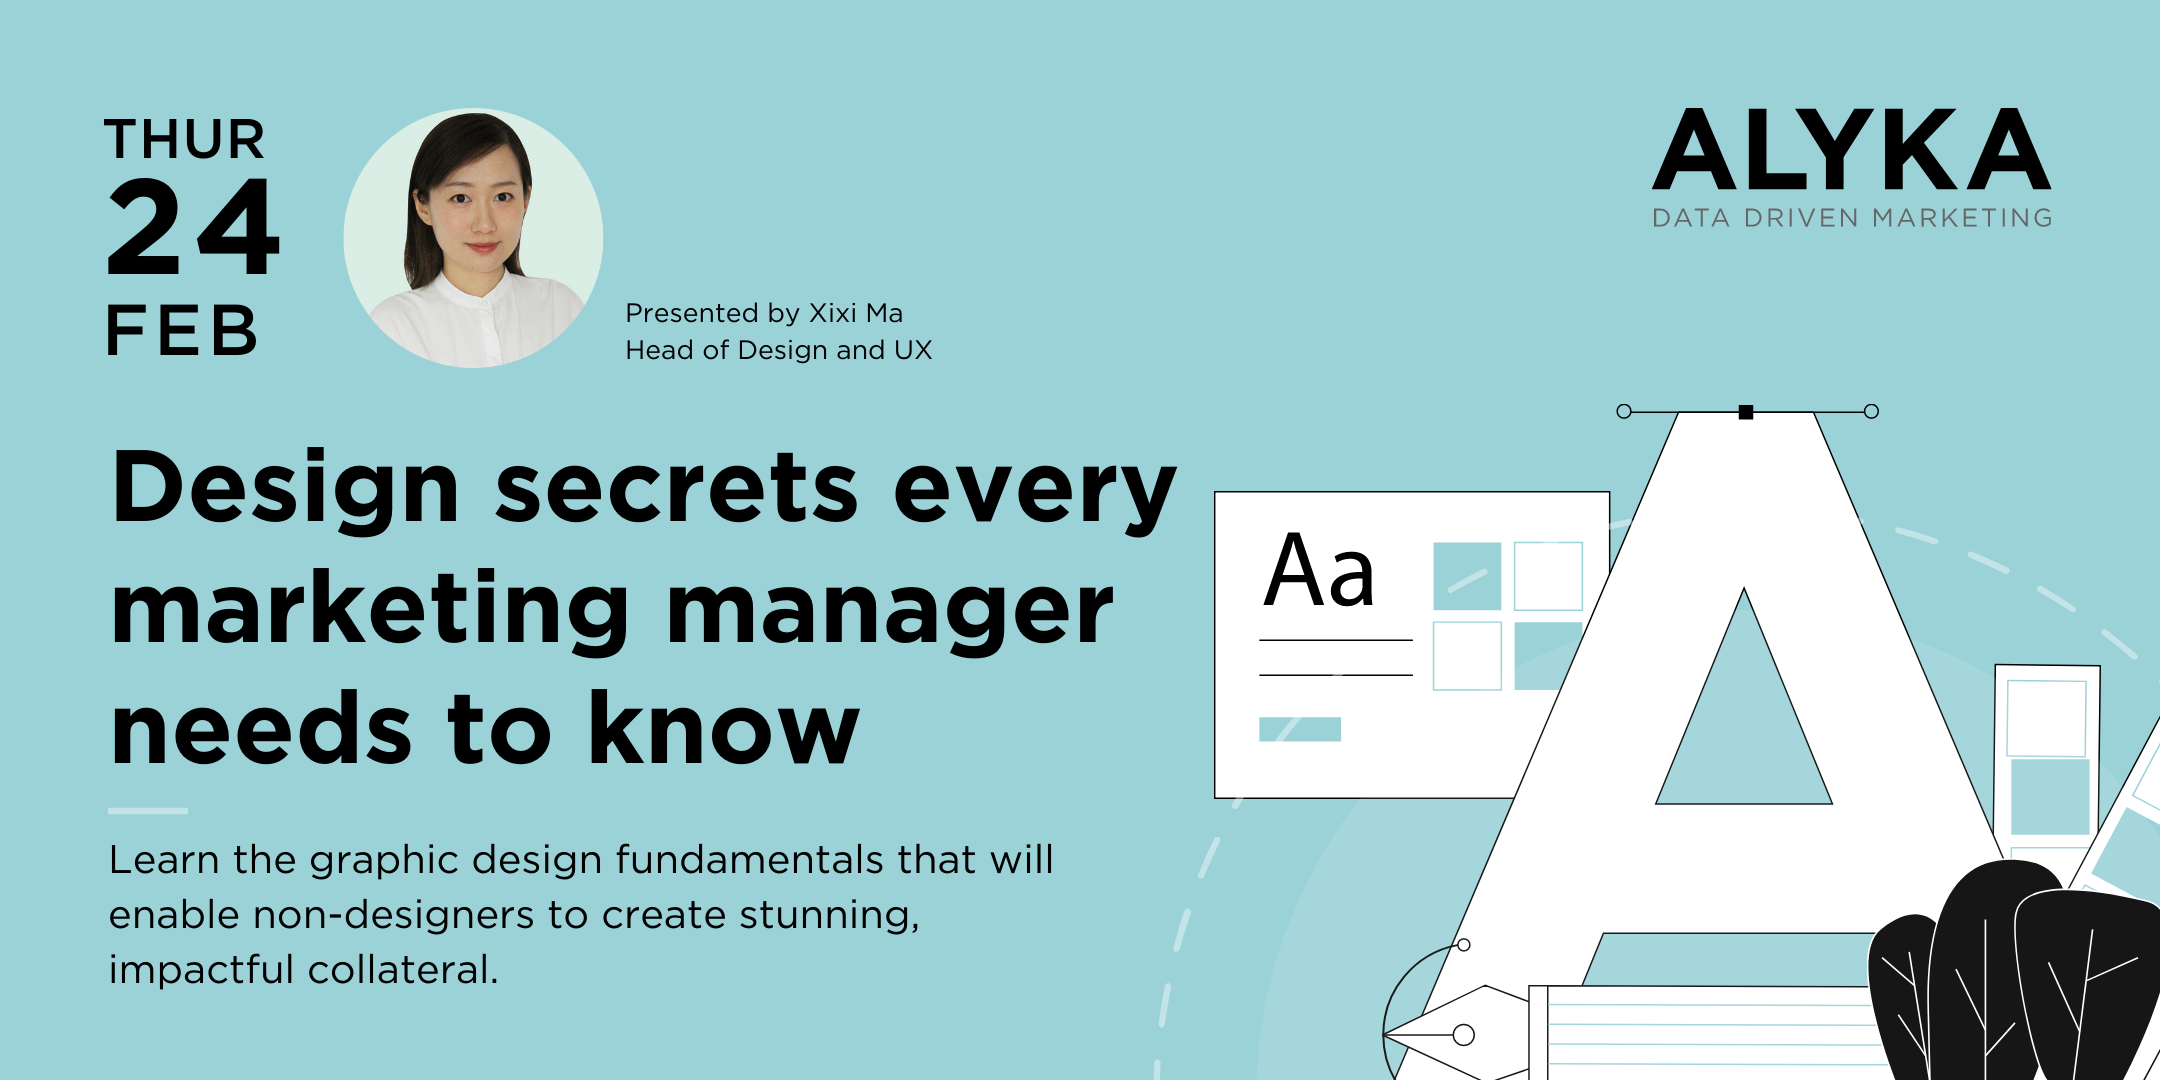 Design secrets every marketing manager needs to know